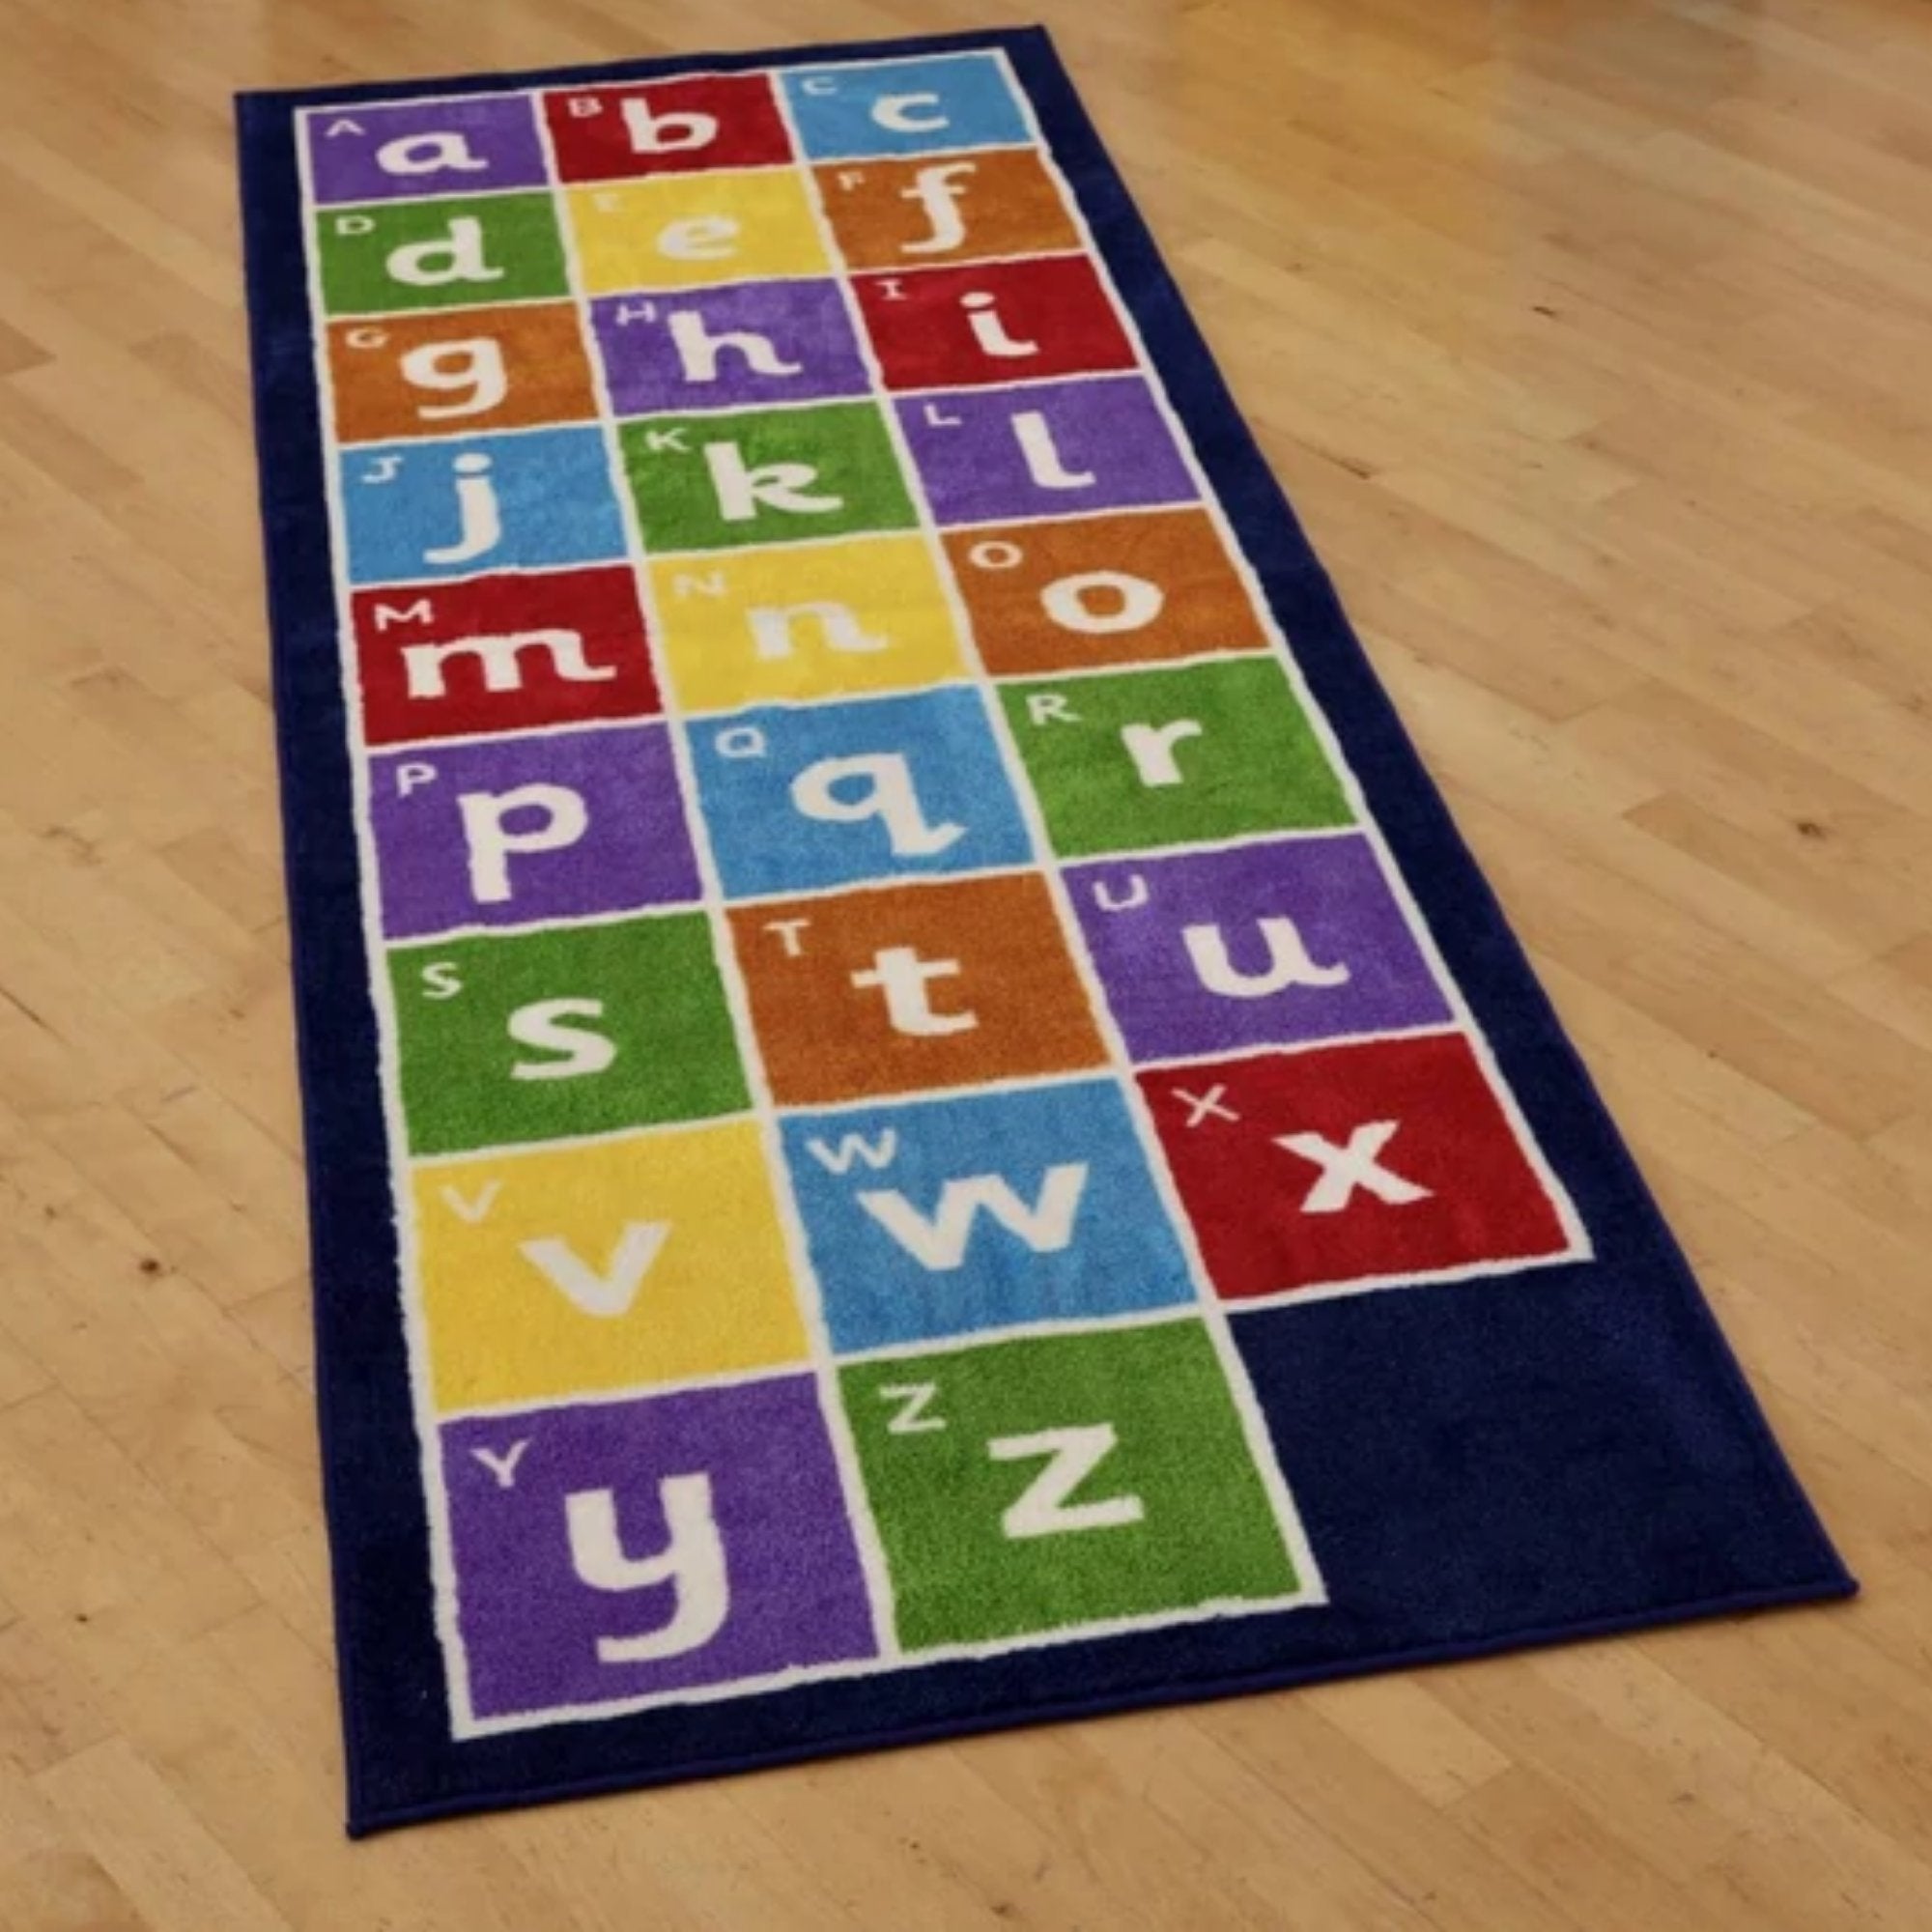 Kinder Alphabet Runner Carpet 3 X 1 Metre, This Kinder™Alphabet Runner Carpet measures to 3 x 1 metre, featuring the alphabet in both lowercase and uppercase. The Kinder™Alphabet Runner Carpet is a Heavy duty Dura-Pile™, a substantial premium quality carpet with an extra thick pile. The soft textured tufted Nylon twist pile is designed specifically for comfort and longevity. Tightly bound edges prevent fraying and the tuft strands meet heavy duty use. Ideal for Early Years and school learning environments w